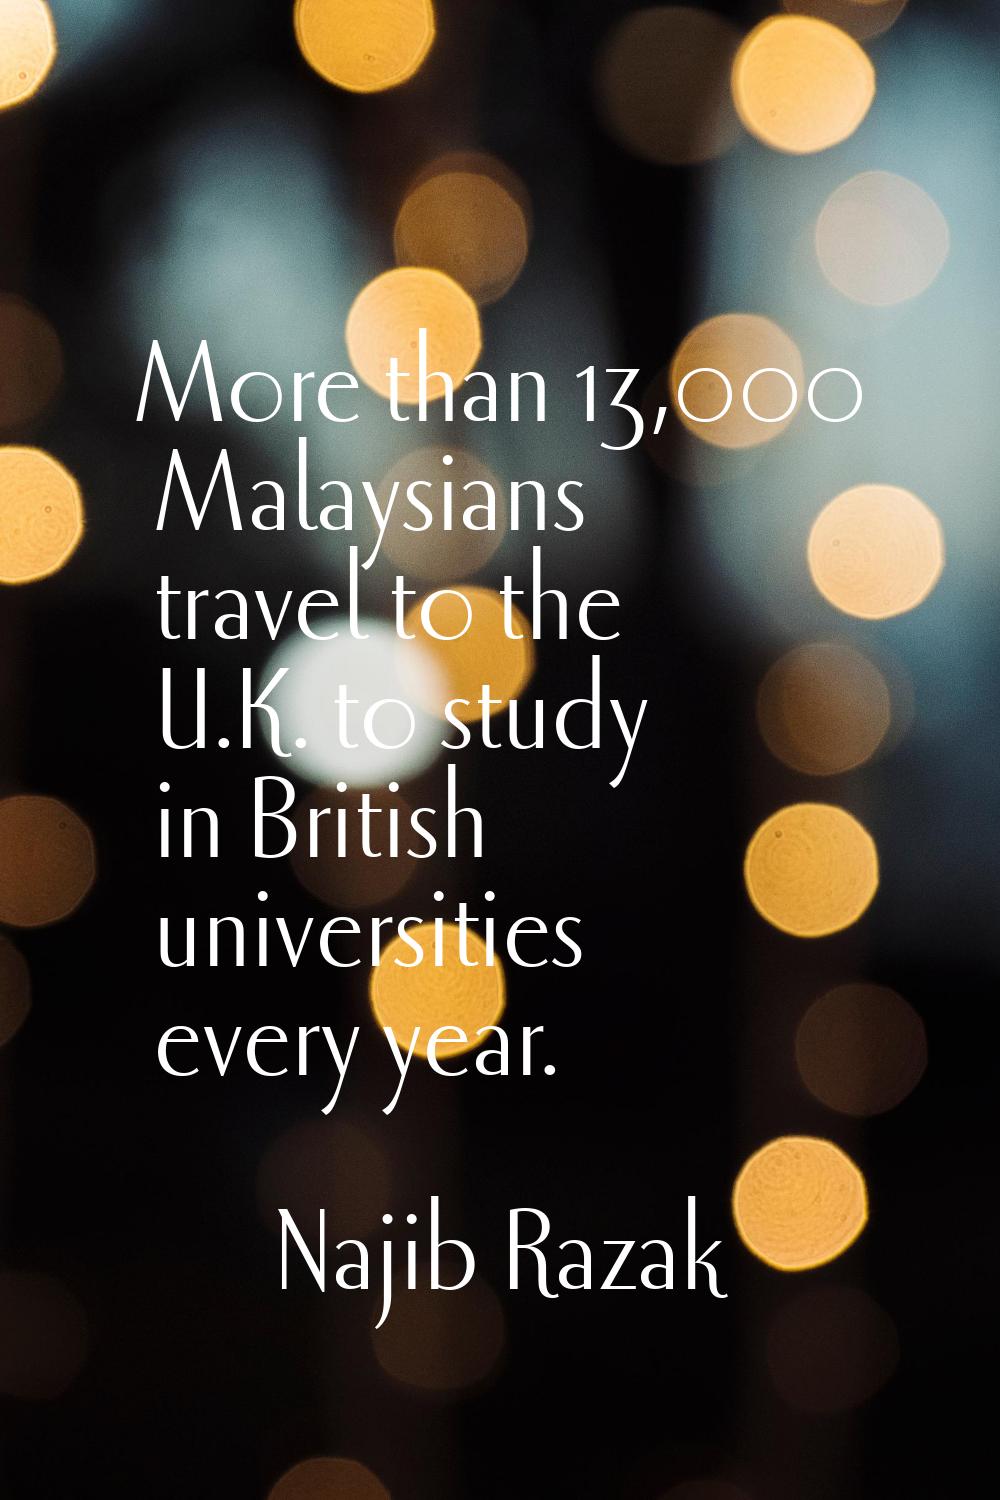 More than 13,000 Malaysians travel to the U.K. to study in British universities every year.